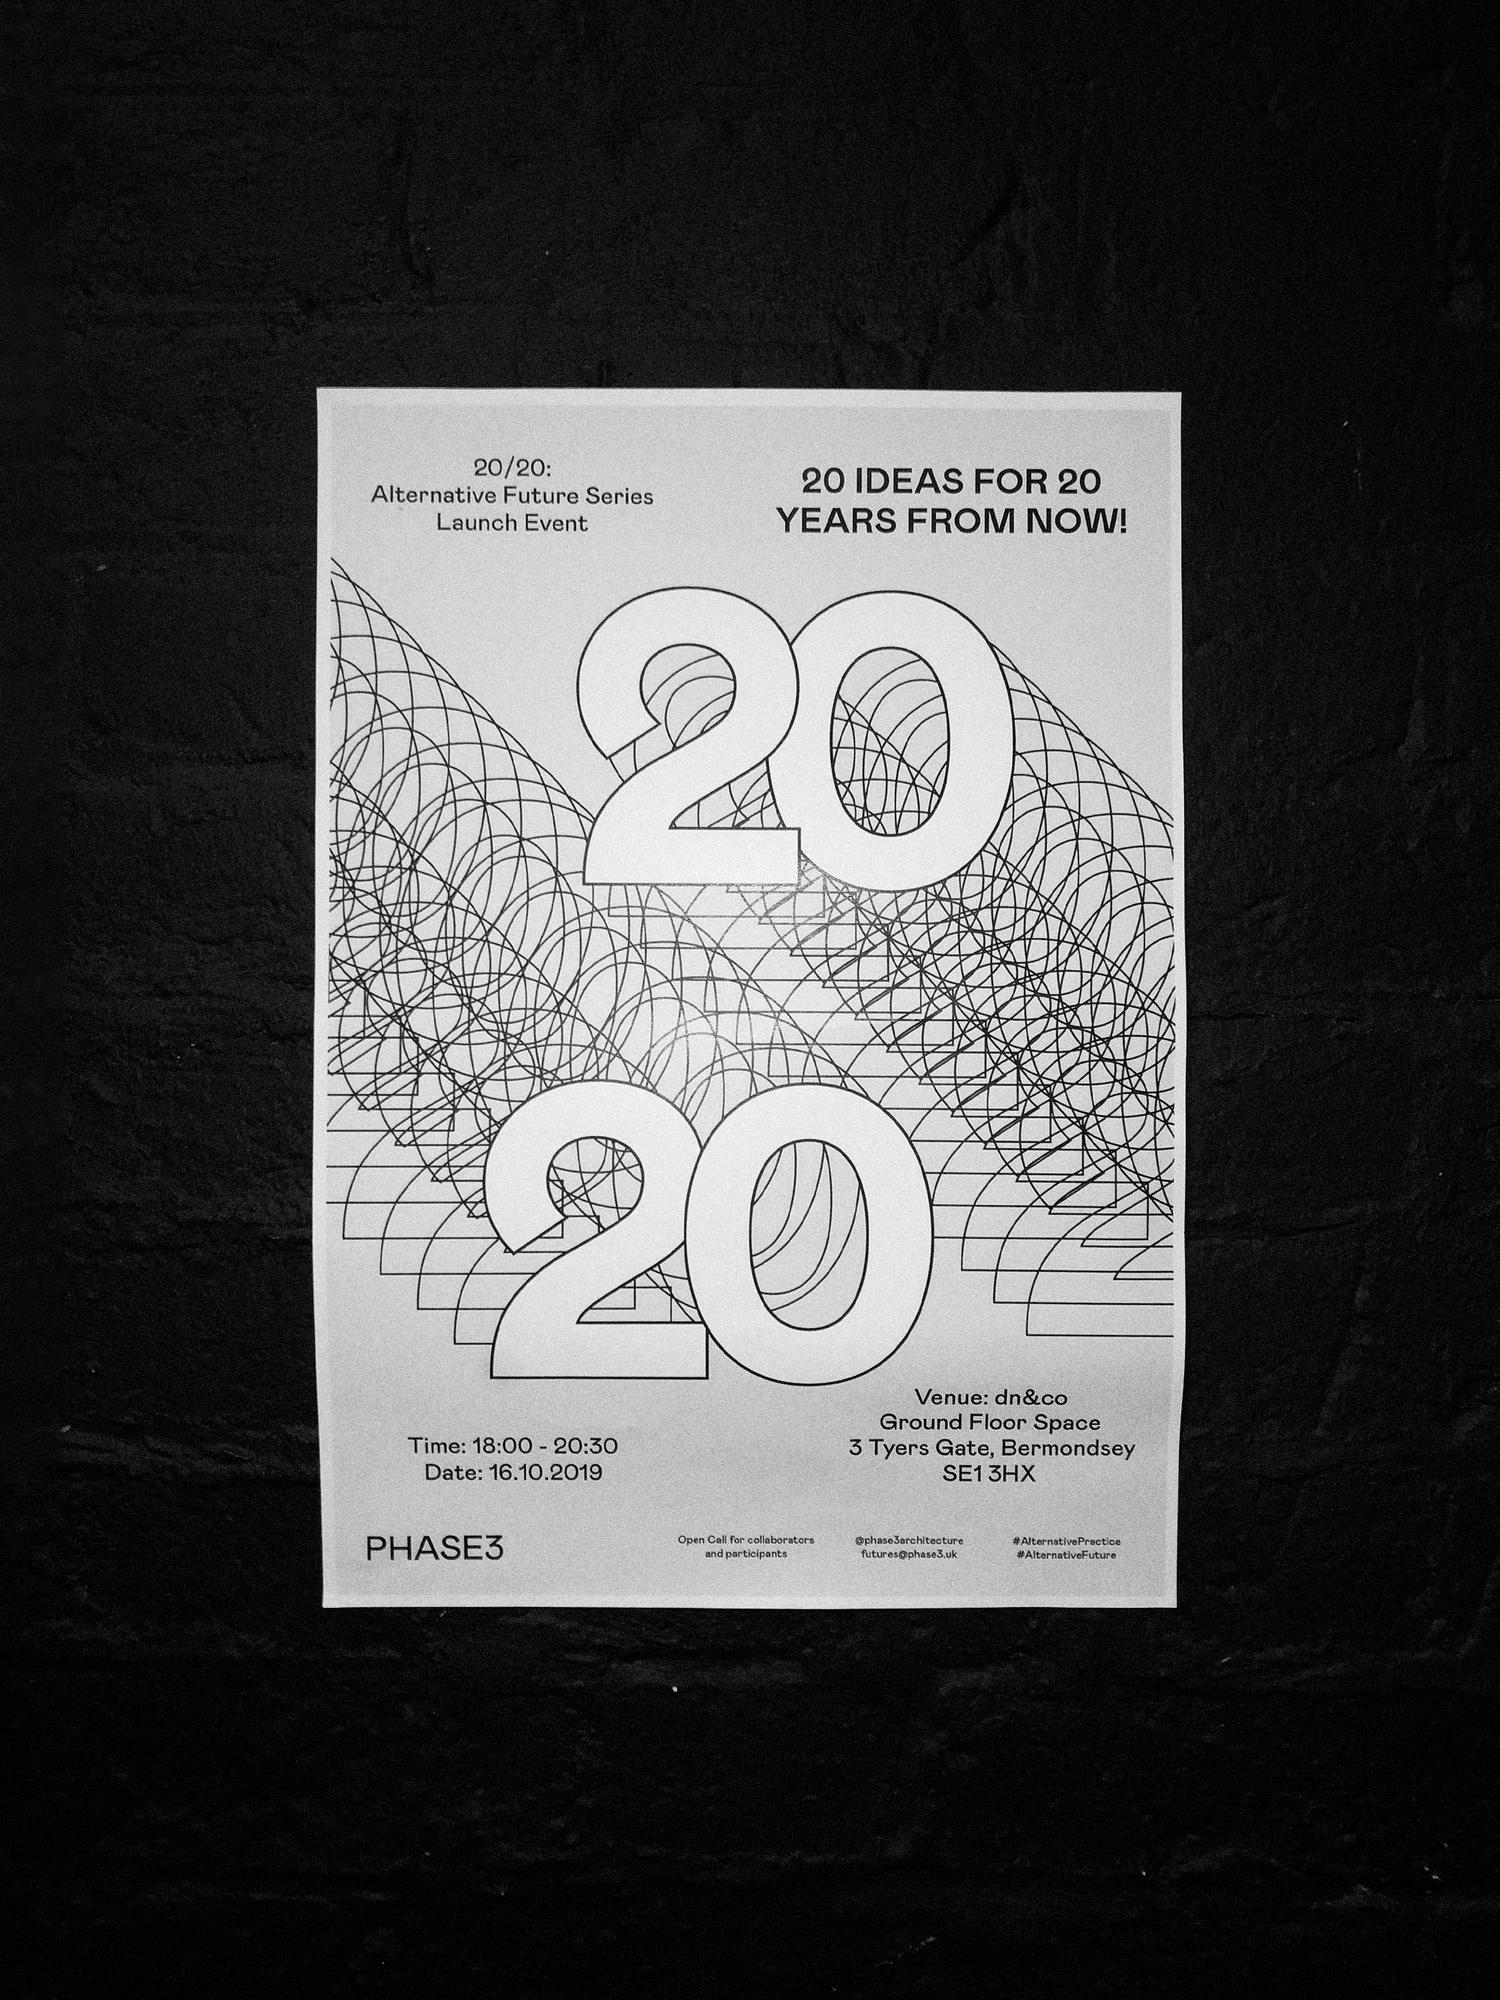 20/20: Alternative Futures – Launch event poster outside The Groundfloor Space